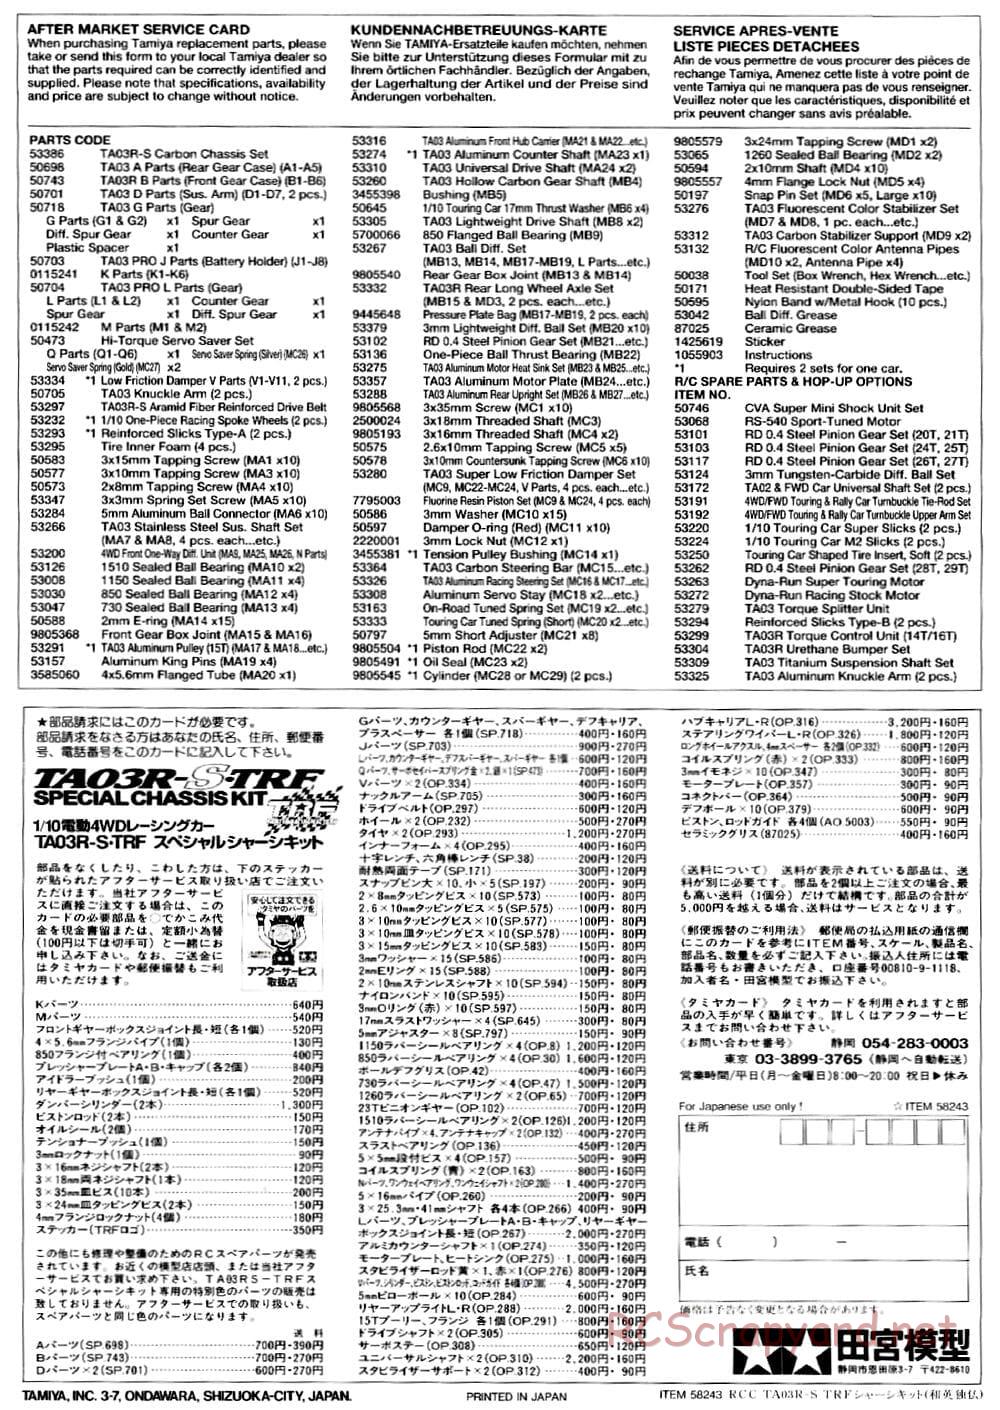 Tamiya - TA-03RS TRF Special Chassis - Manual - Page 25